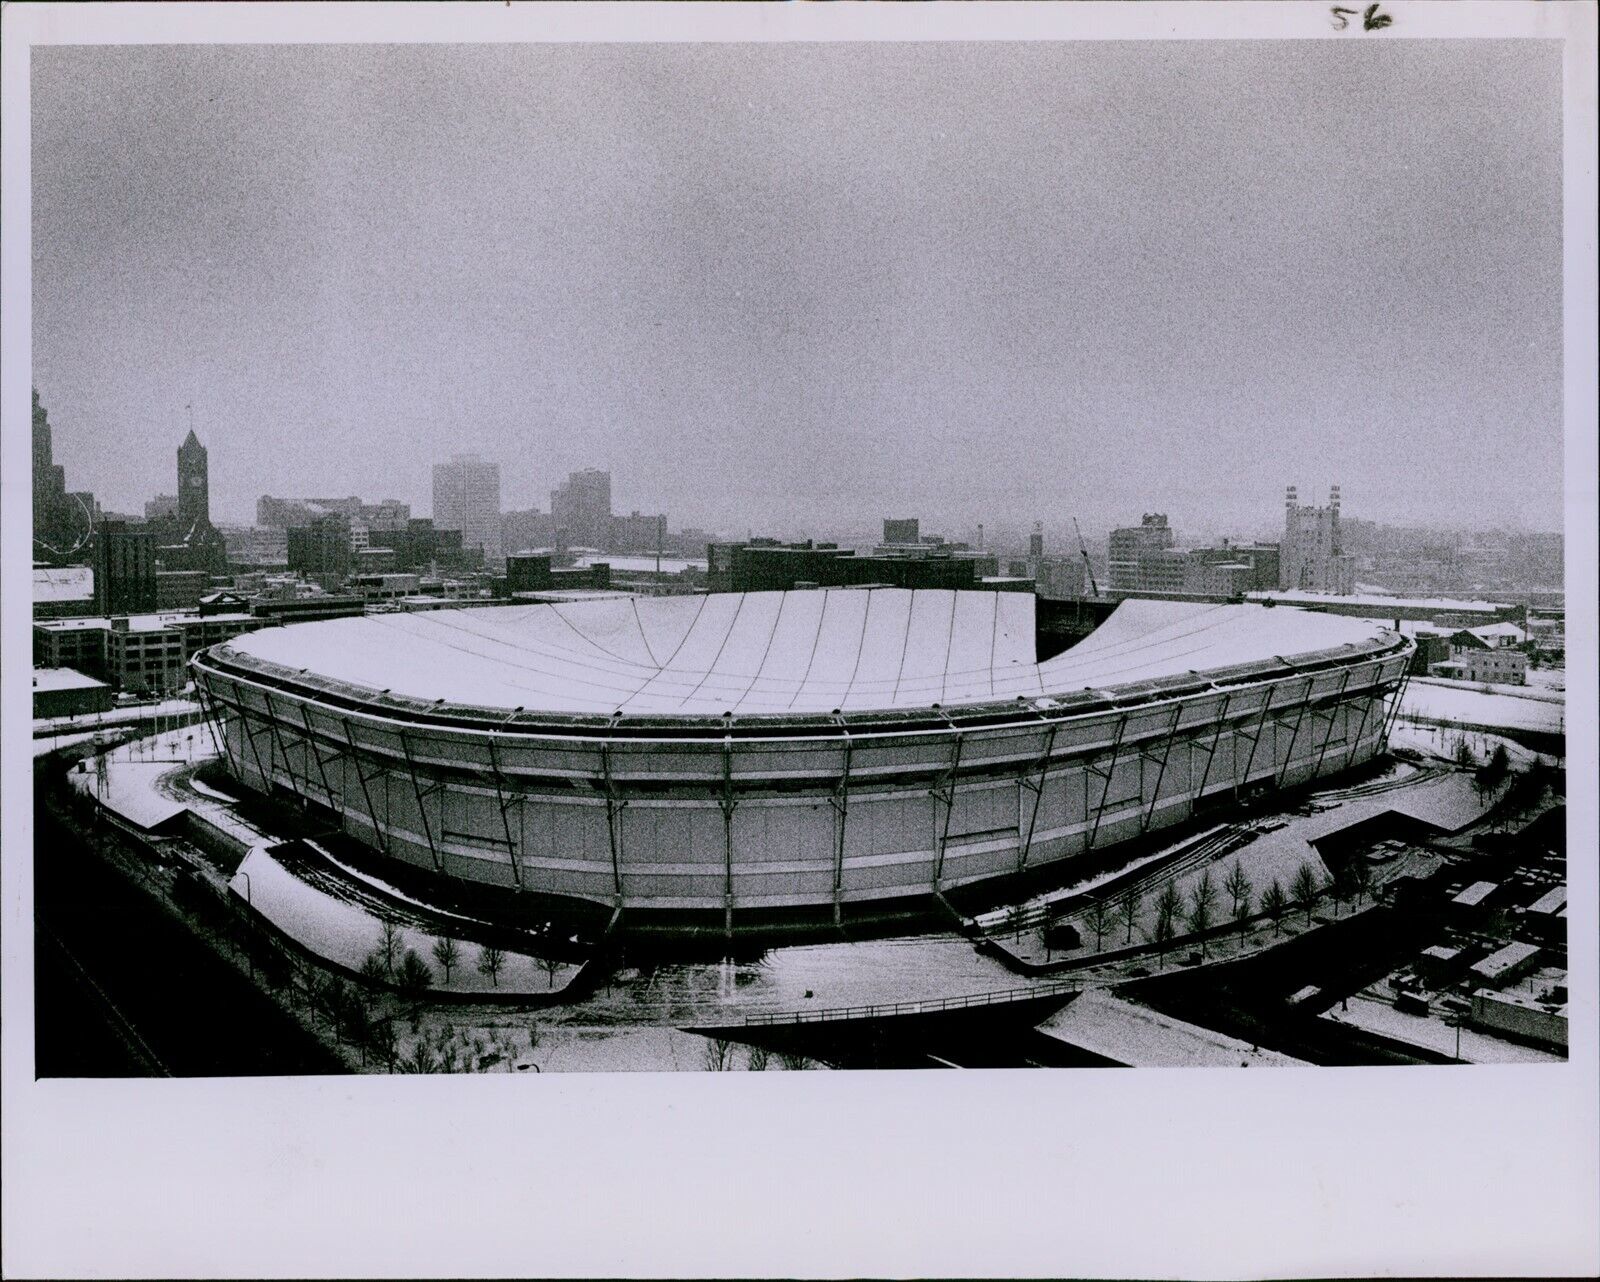 LG827 1982 Original Photo METRODOME DAMAGED Roof Collapsed Deflated Building